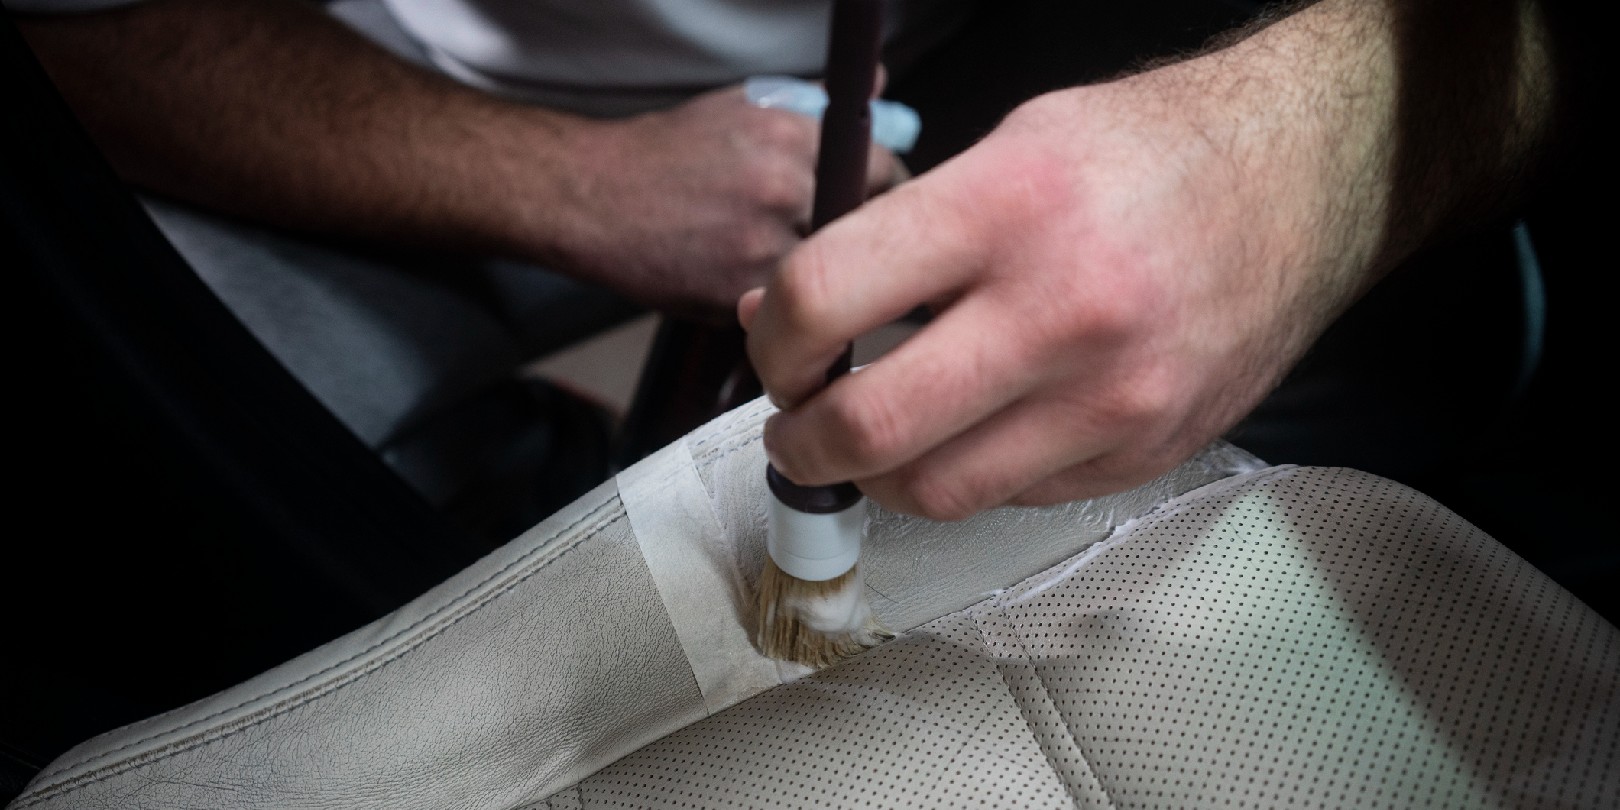 How to remove stains from car seats